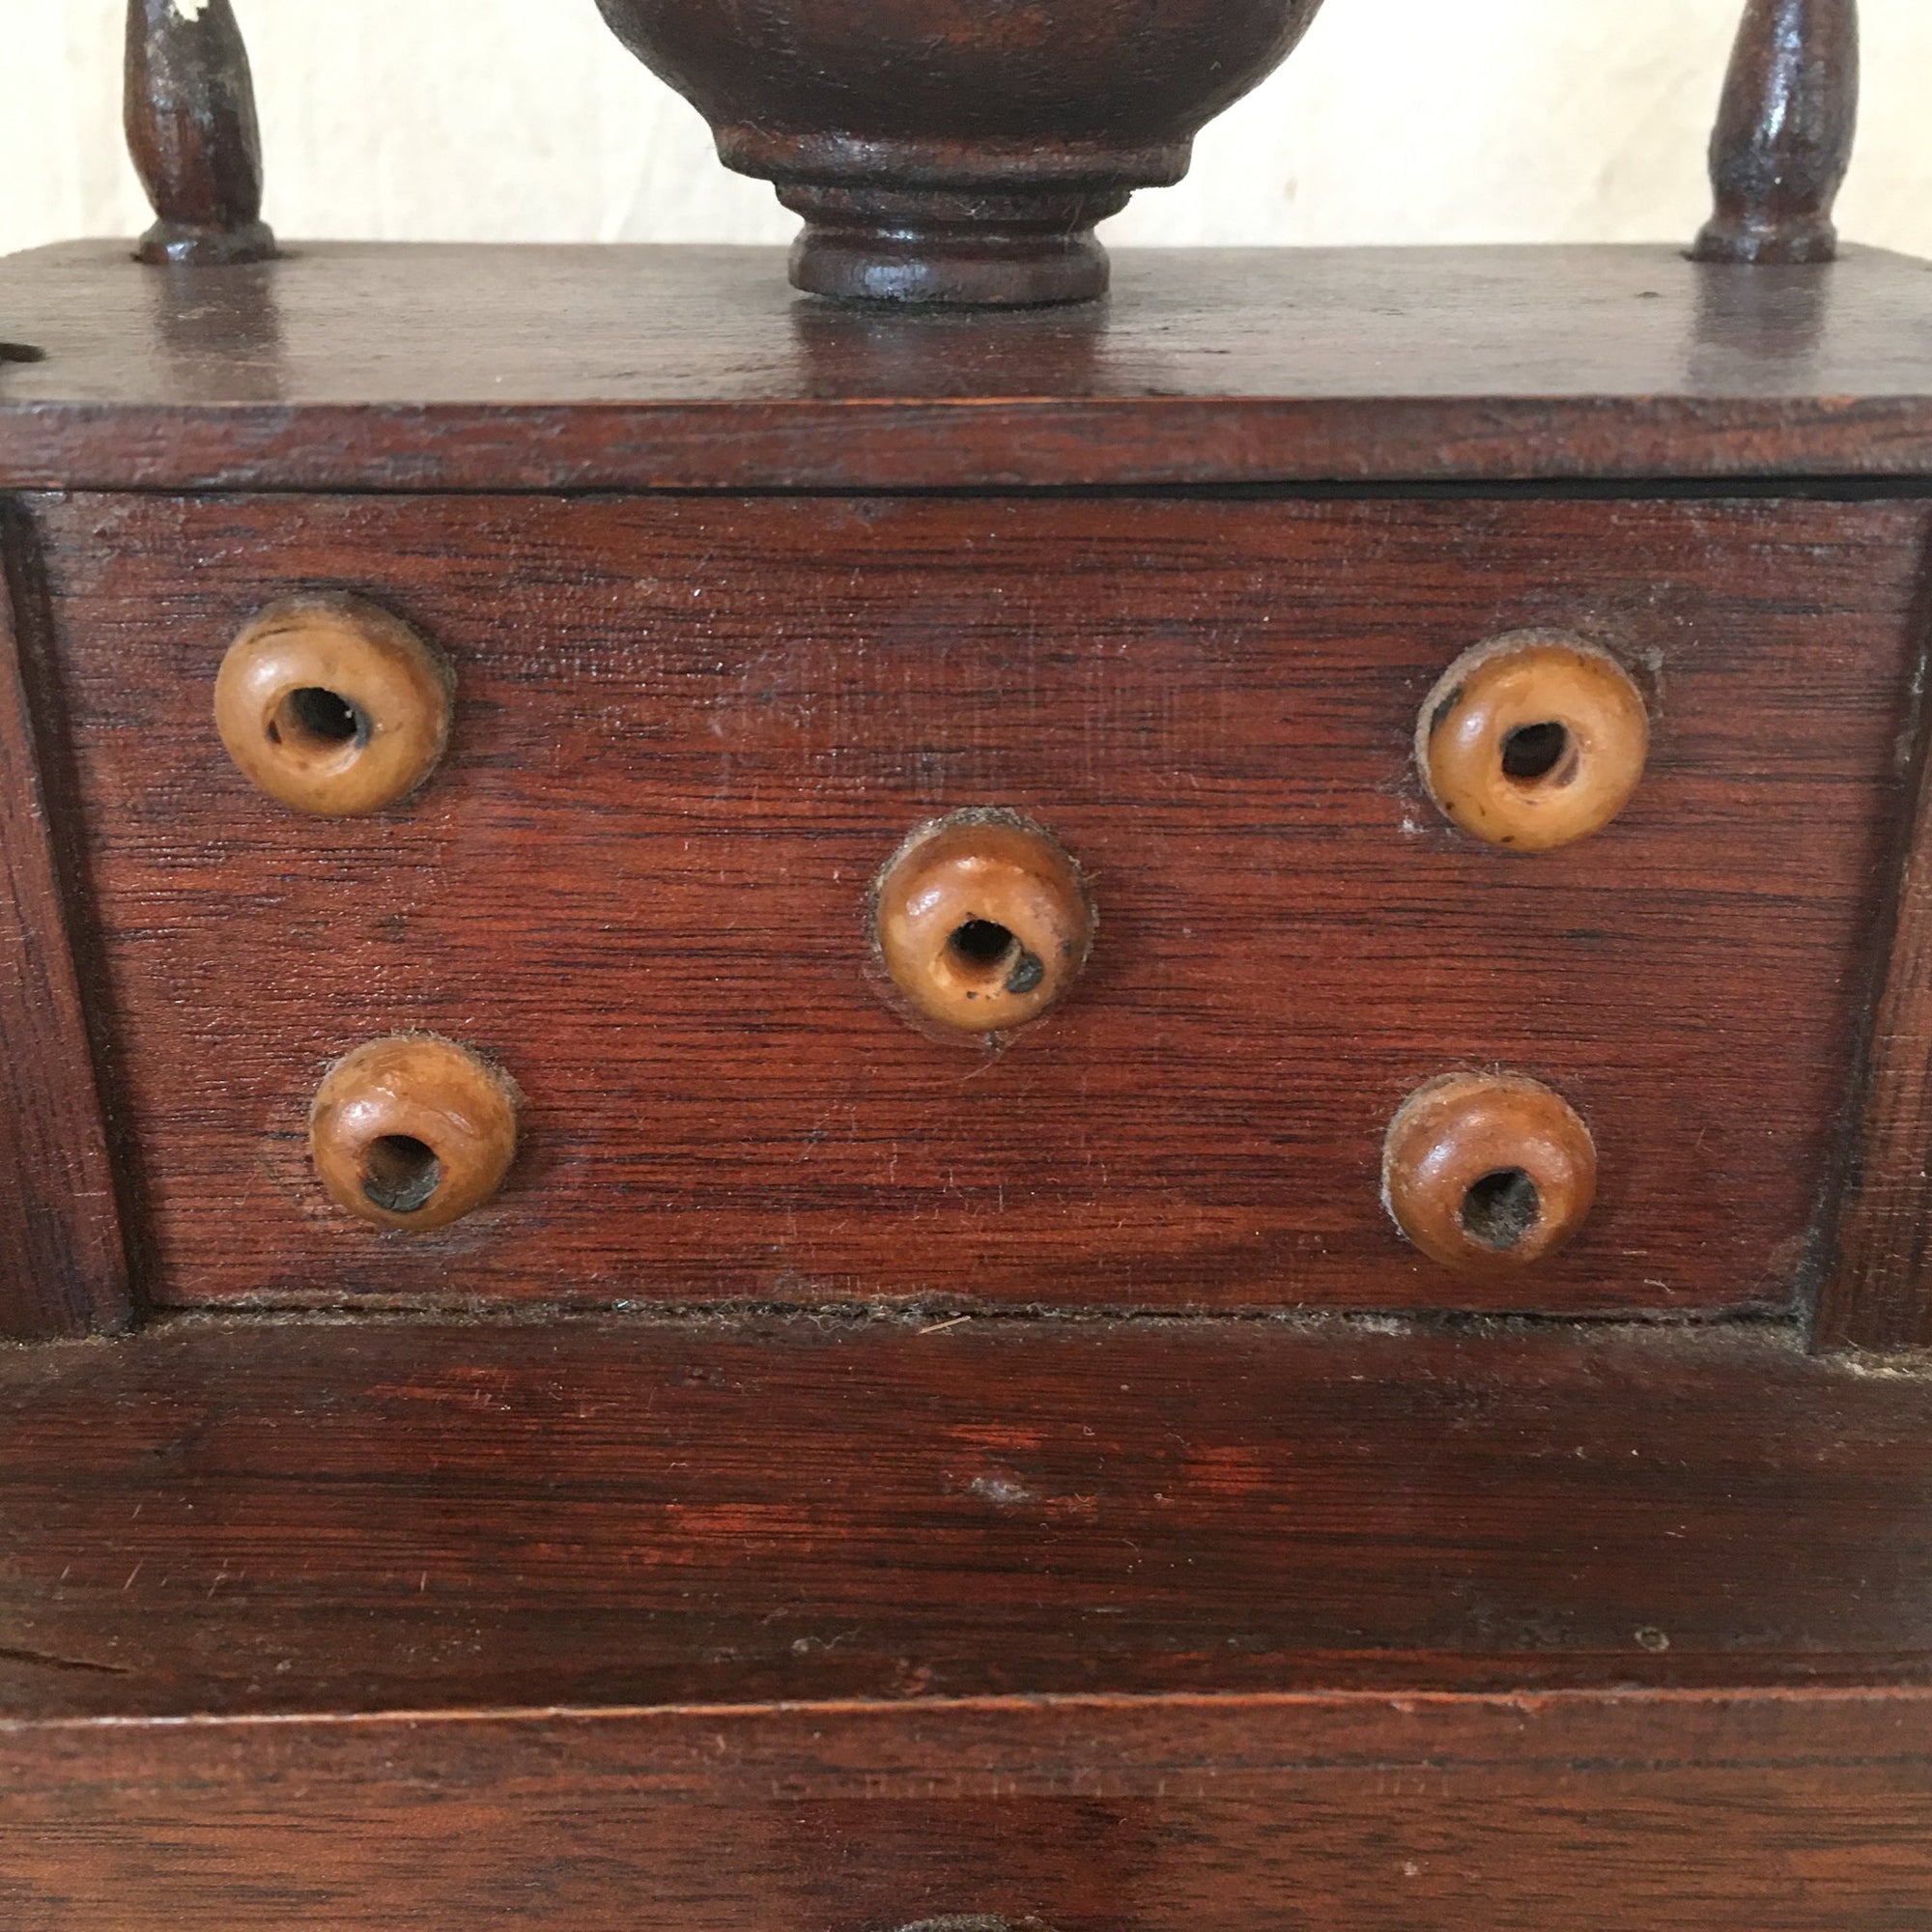 Late 1800’s – Early 1900’s 2 Tier Handmade Sewing Box